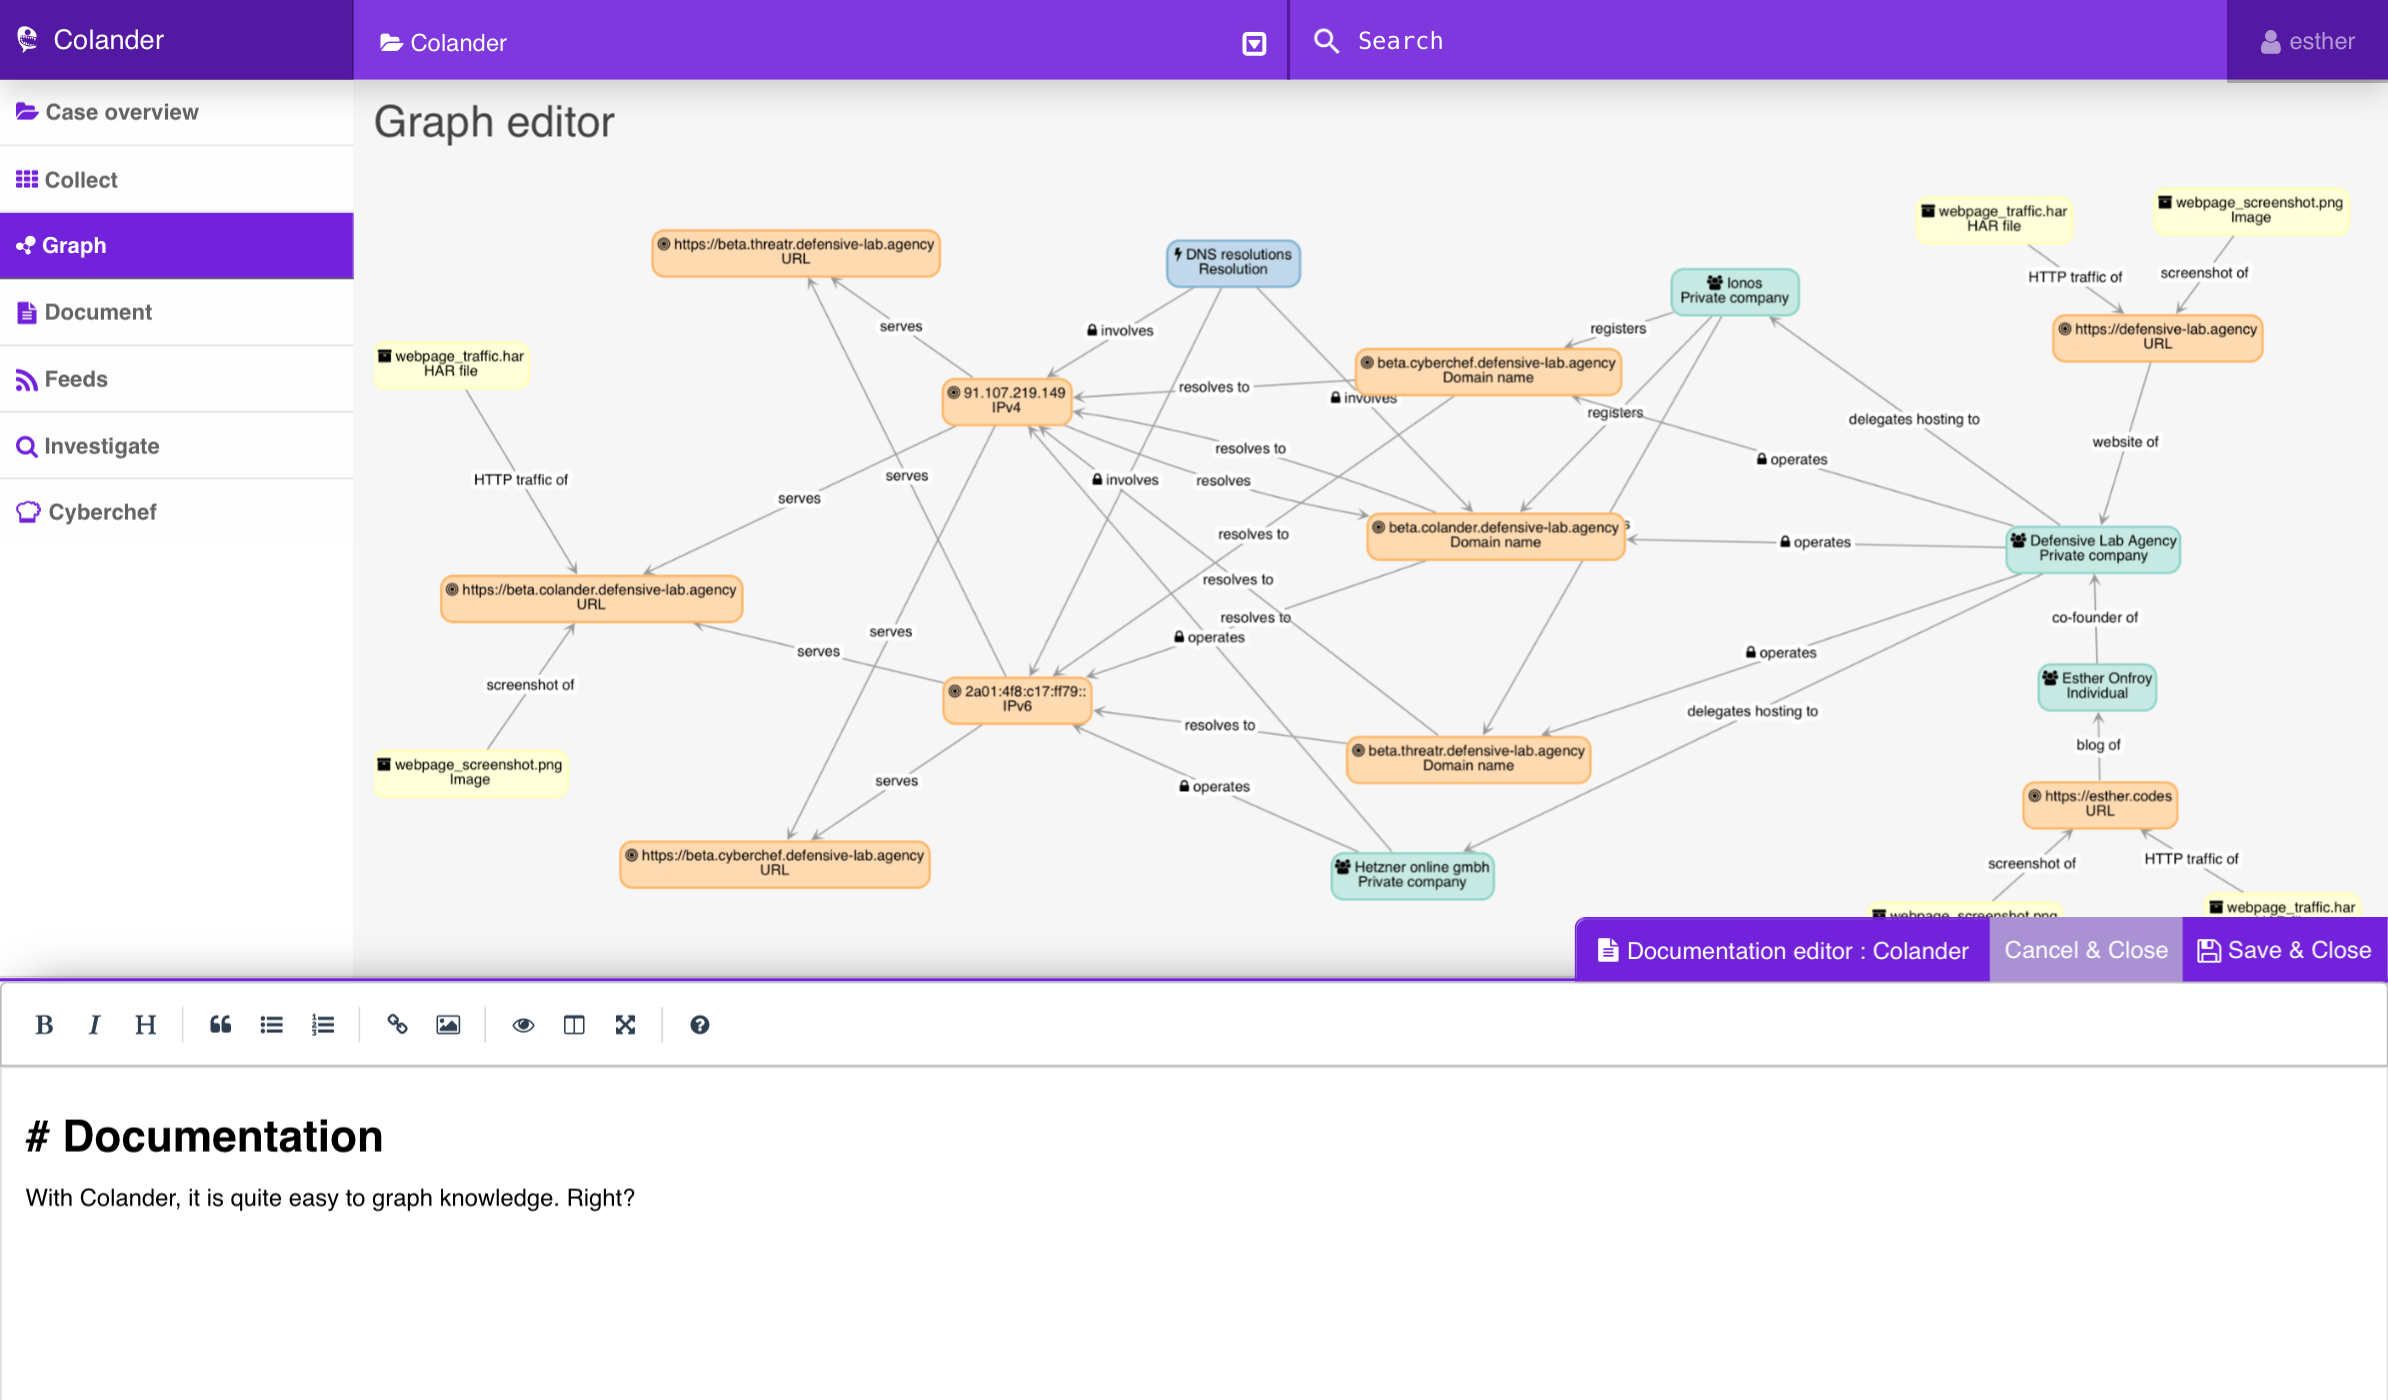 Overview of the Colander graph and documentation editor